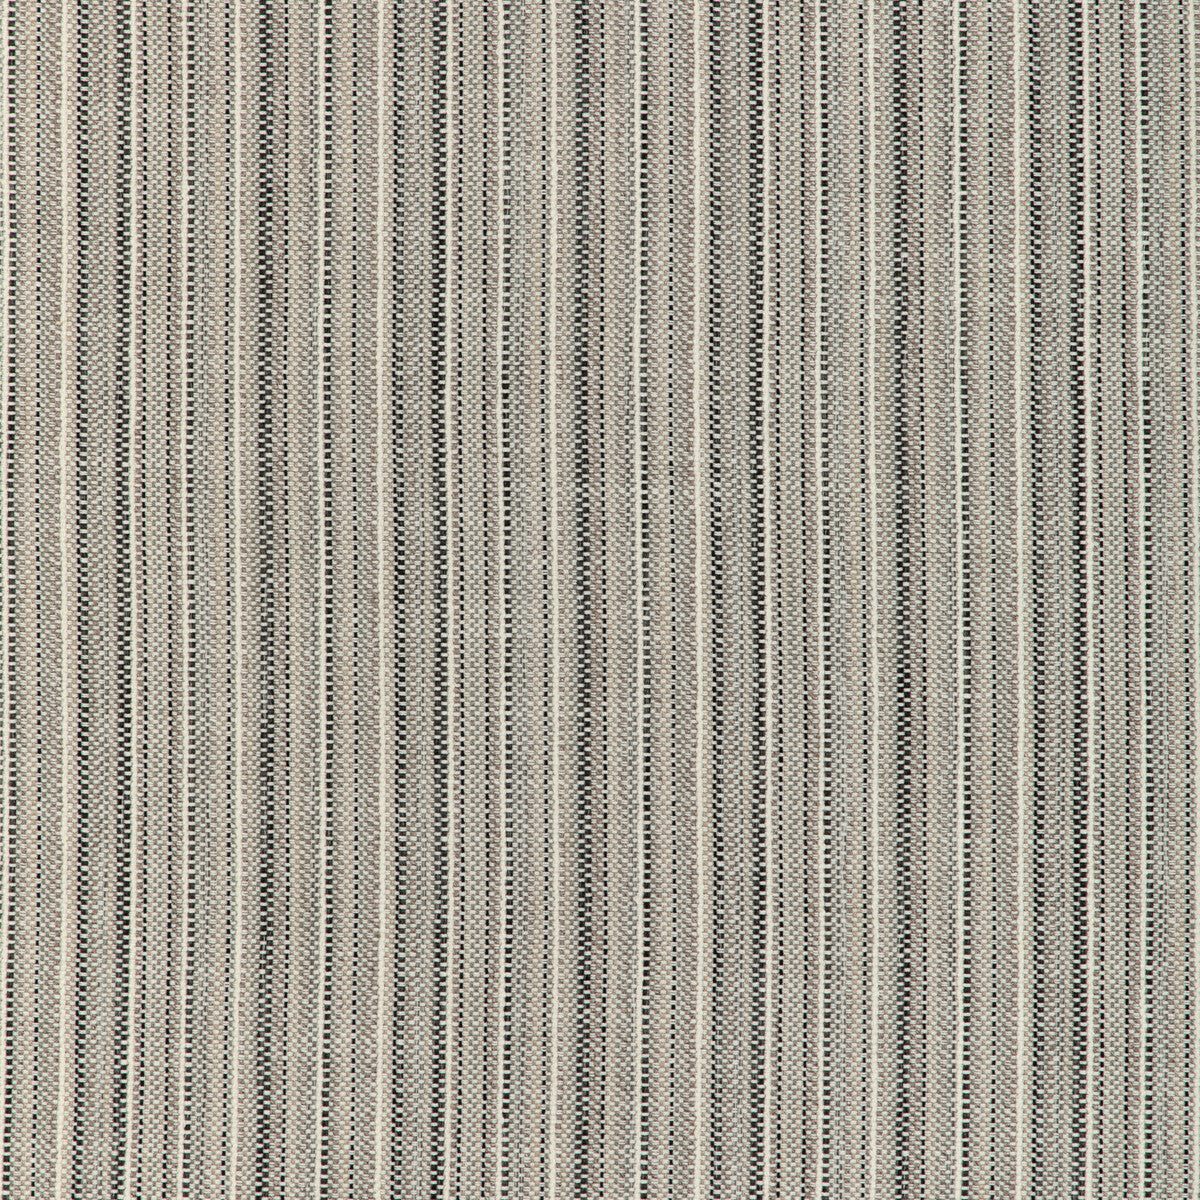 Kravet Design fabric in 37148-1121 color - pattern 37148.1121.0 - by Kravet Design in the Woven Colors collection